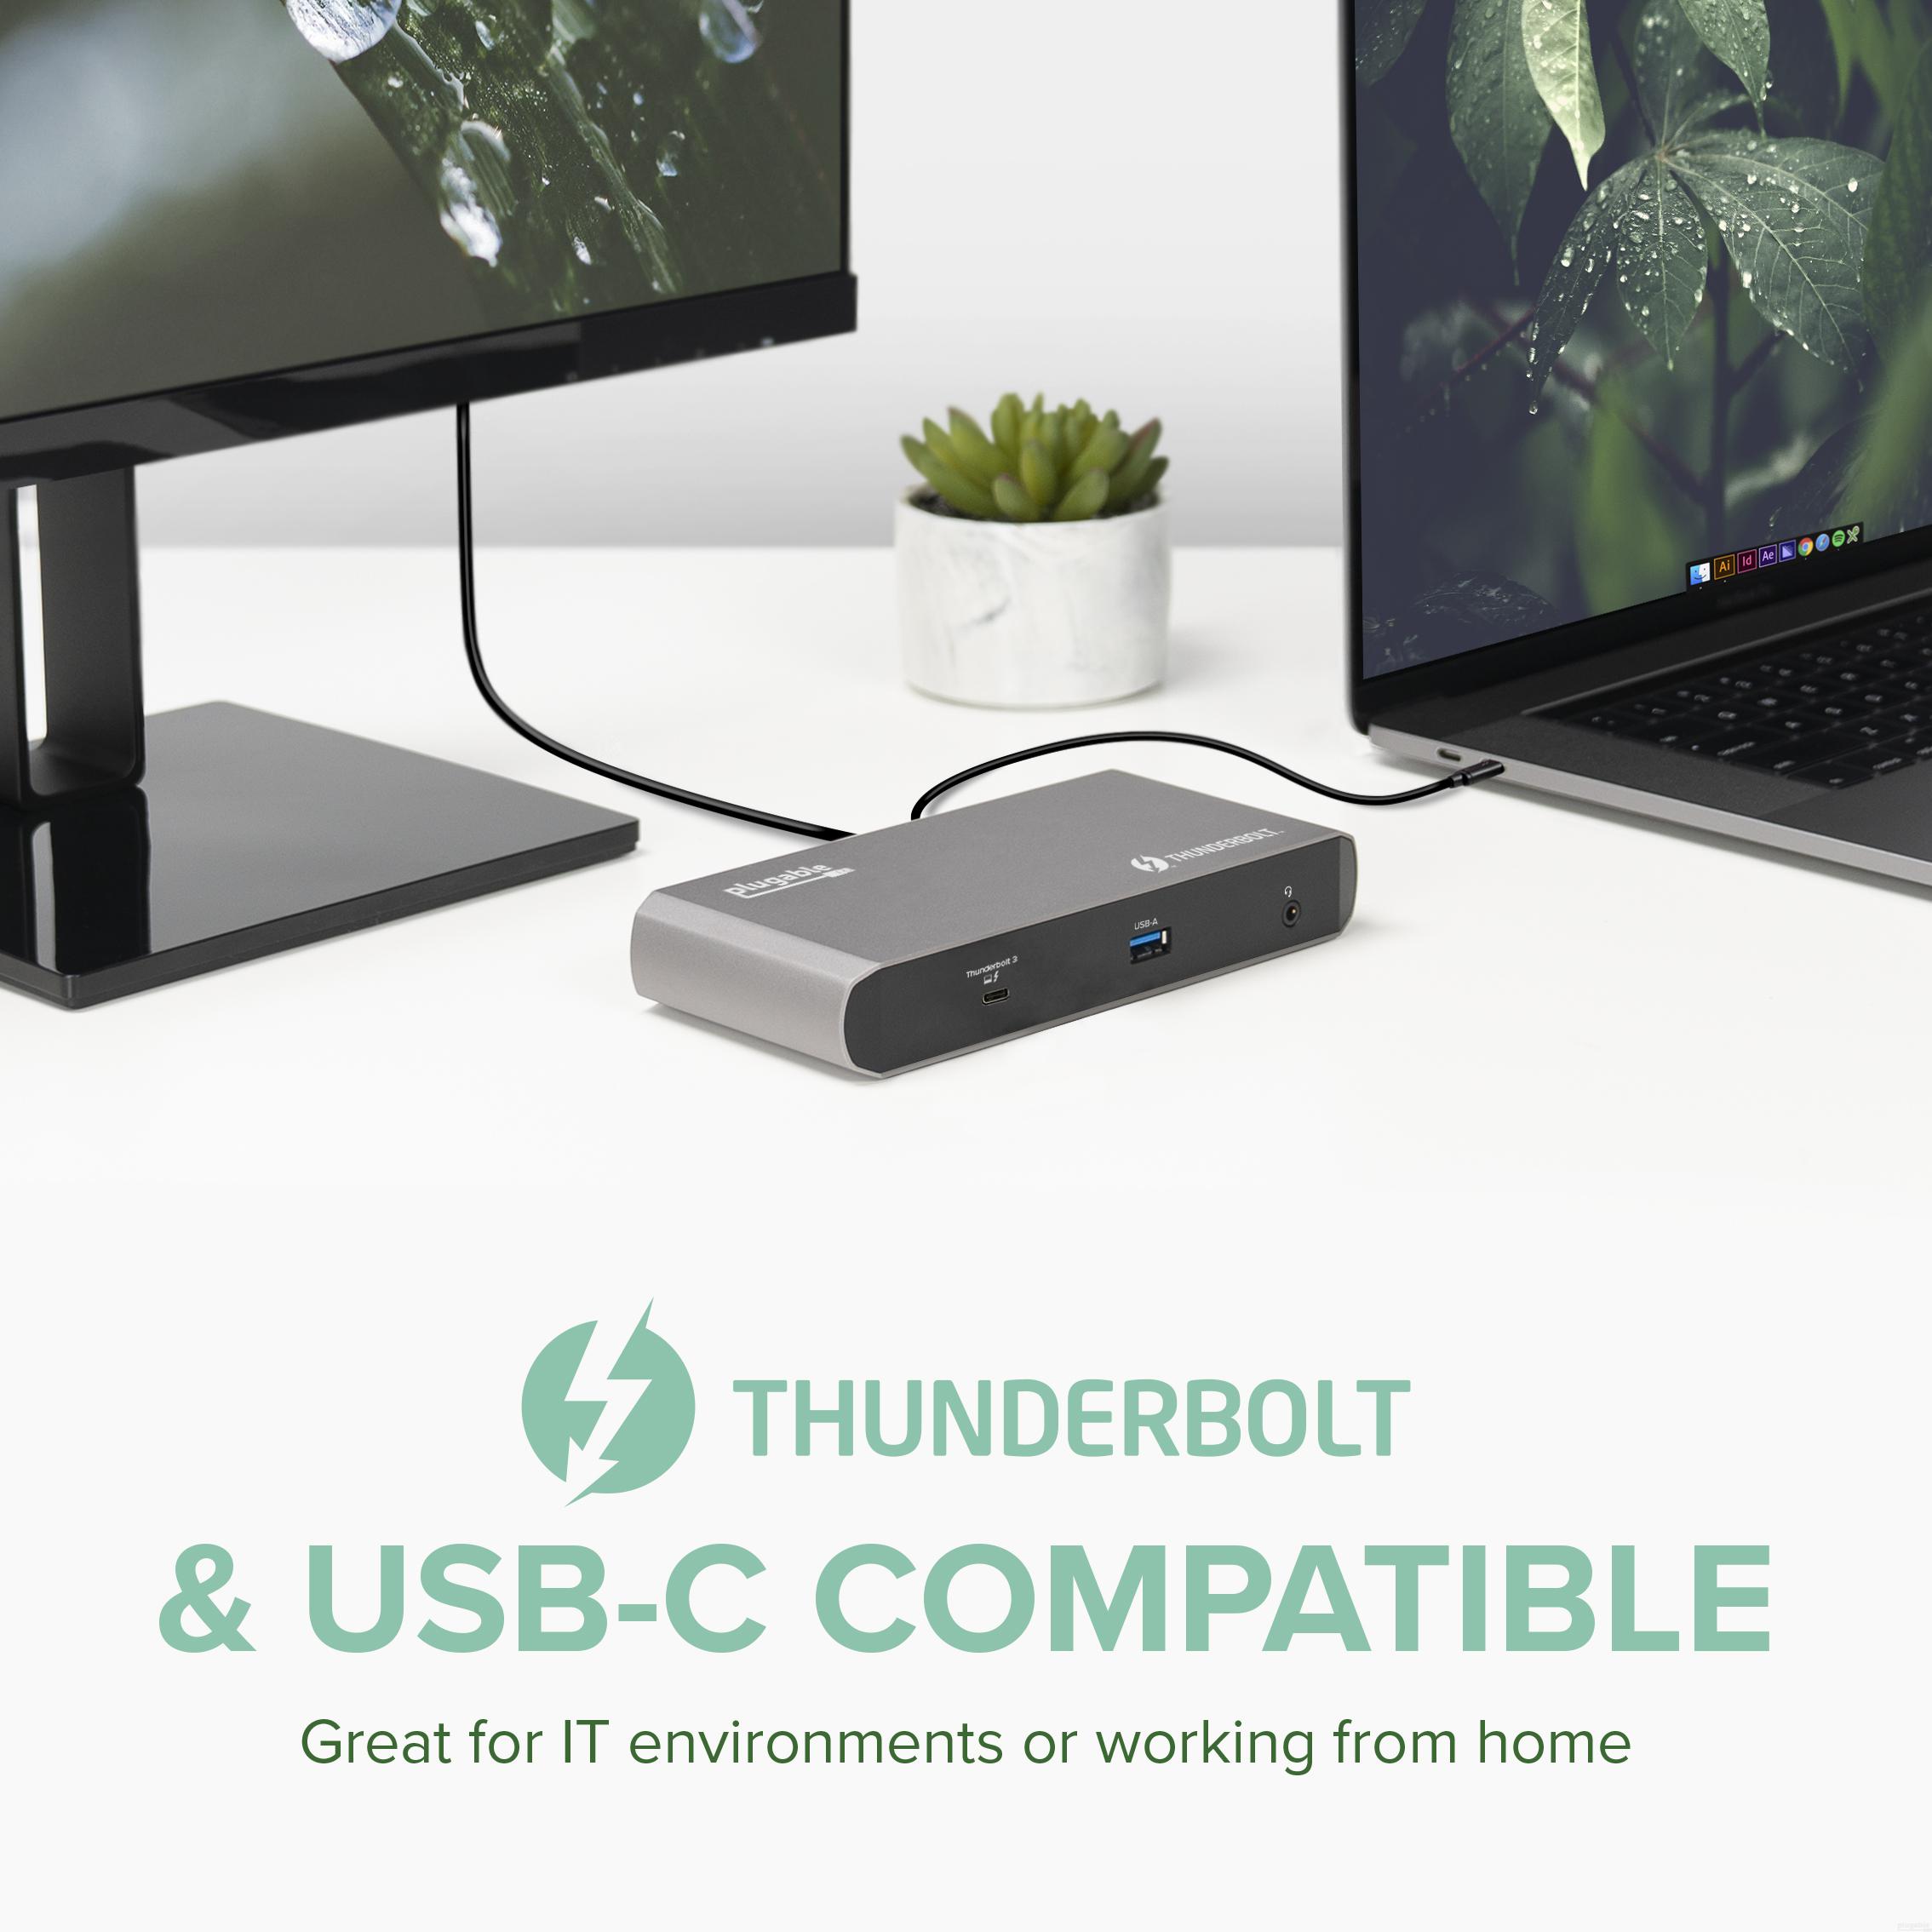 Plugable Thunderbolt 3 and USB C Dock with 60W Charging, Compatible with MacBook / MacBook Pro and Windows, Dual DisplayPort or HDMI with Included Adapter, 2x USB-C, 3x USB 3.0, Gigabit Ethernet - image 2 of 7